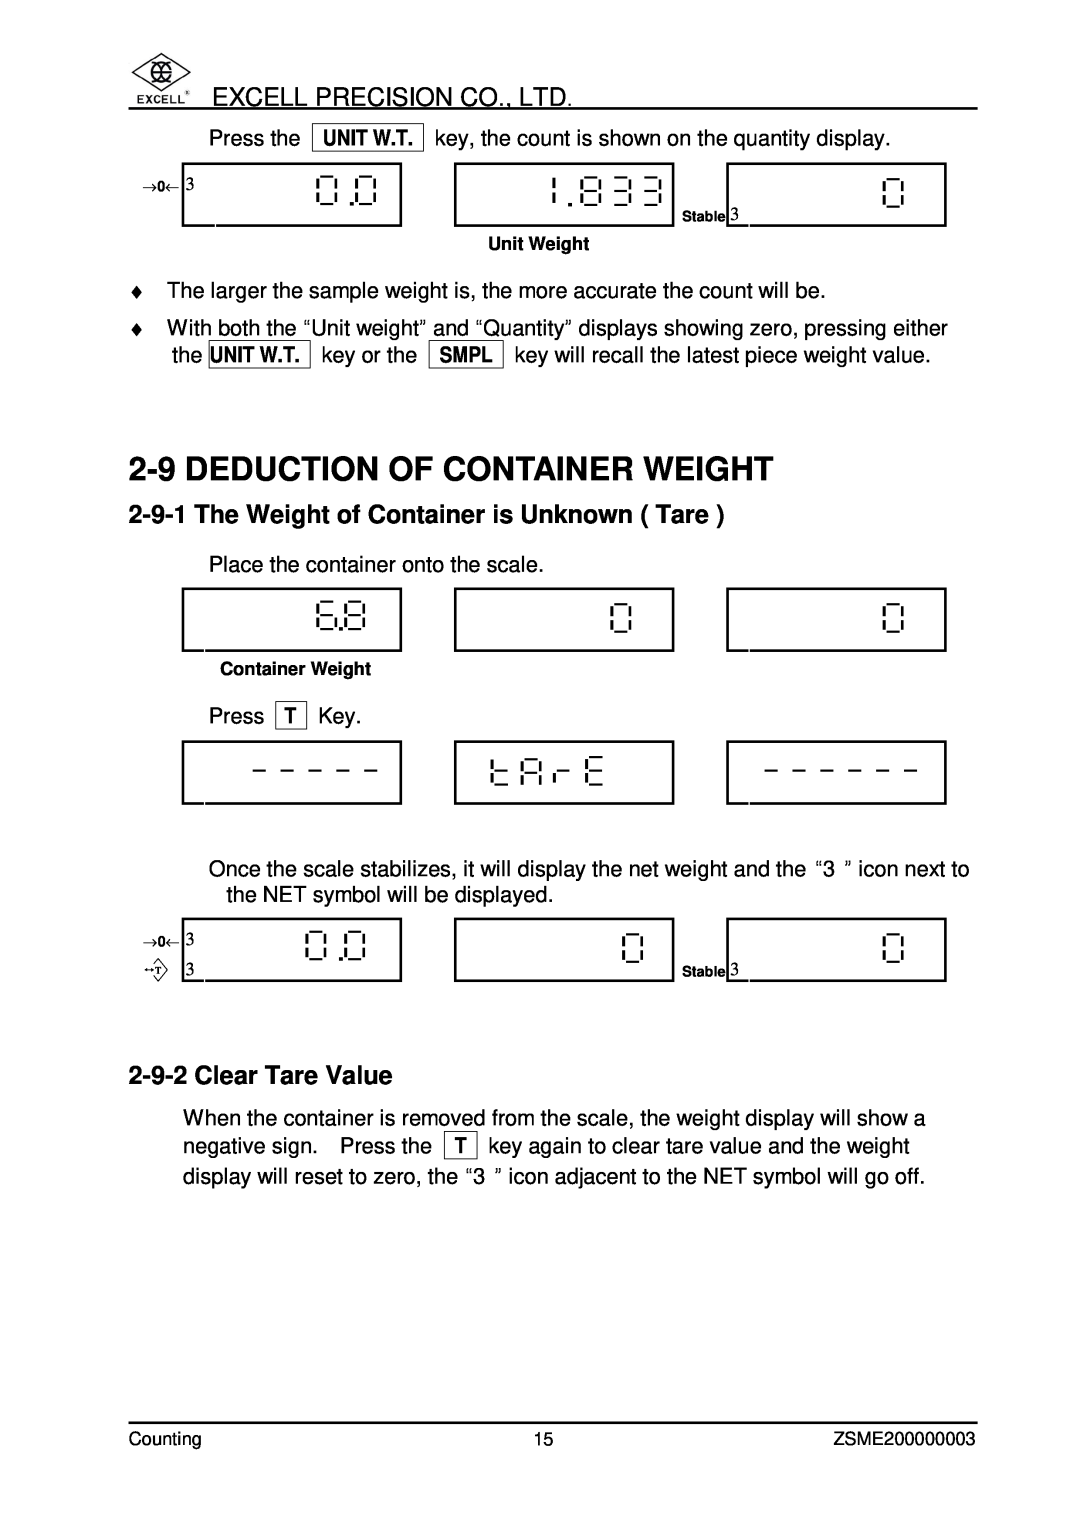 Excell Precision Counting Scale Deduction Of Container Weight, The Weight of Container is Unknown Tare, Clear Tare Value 